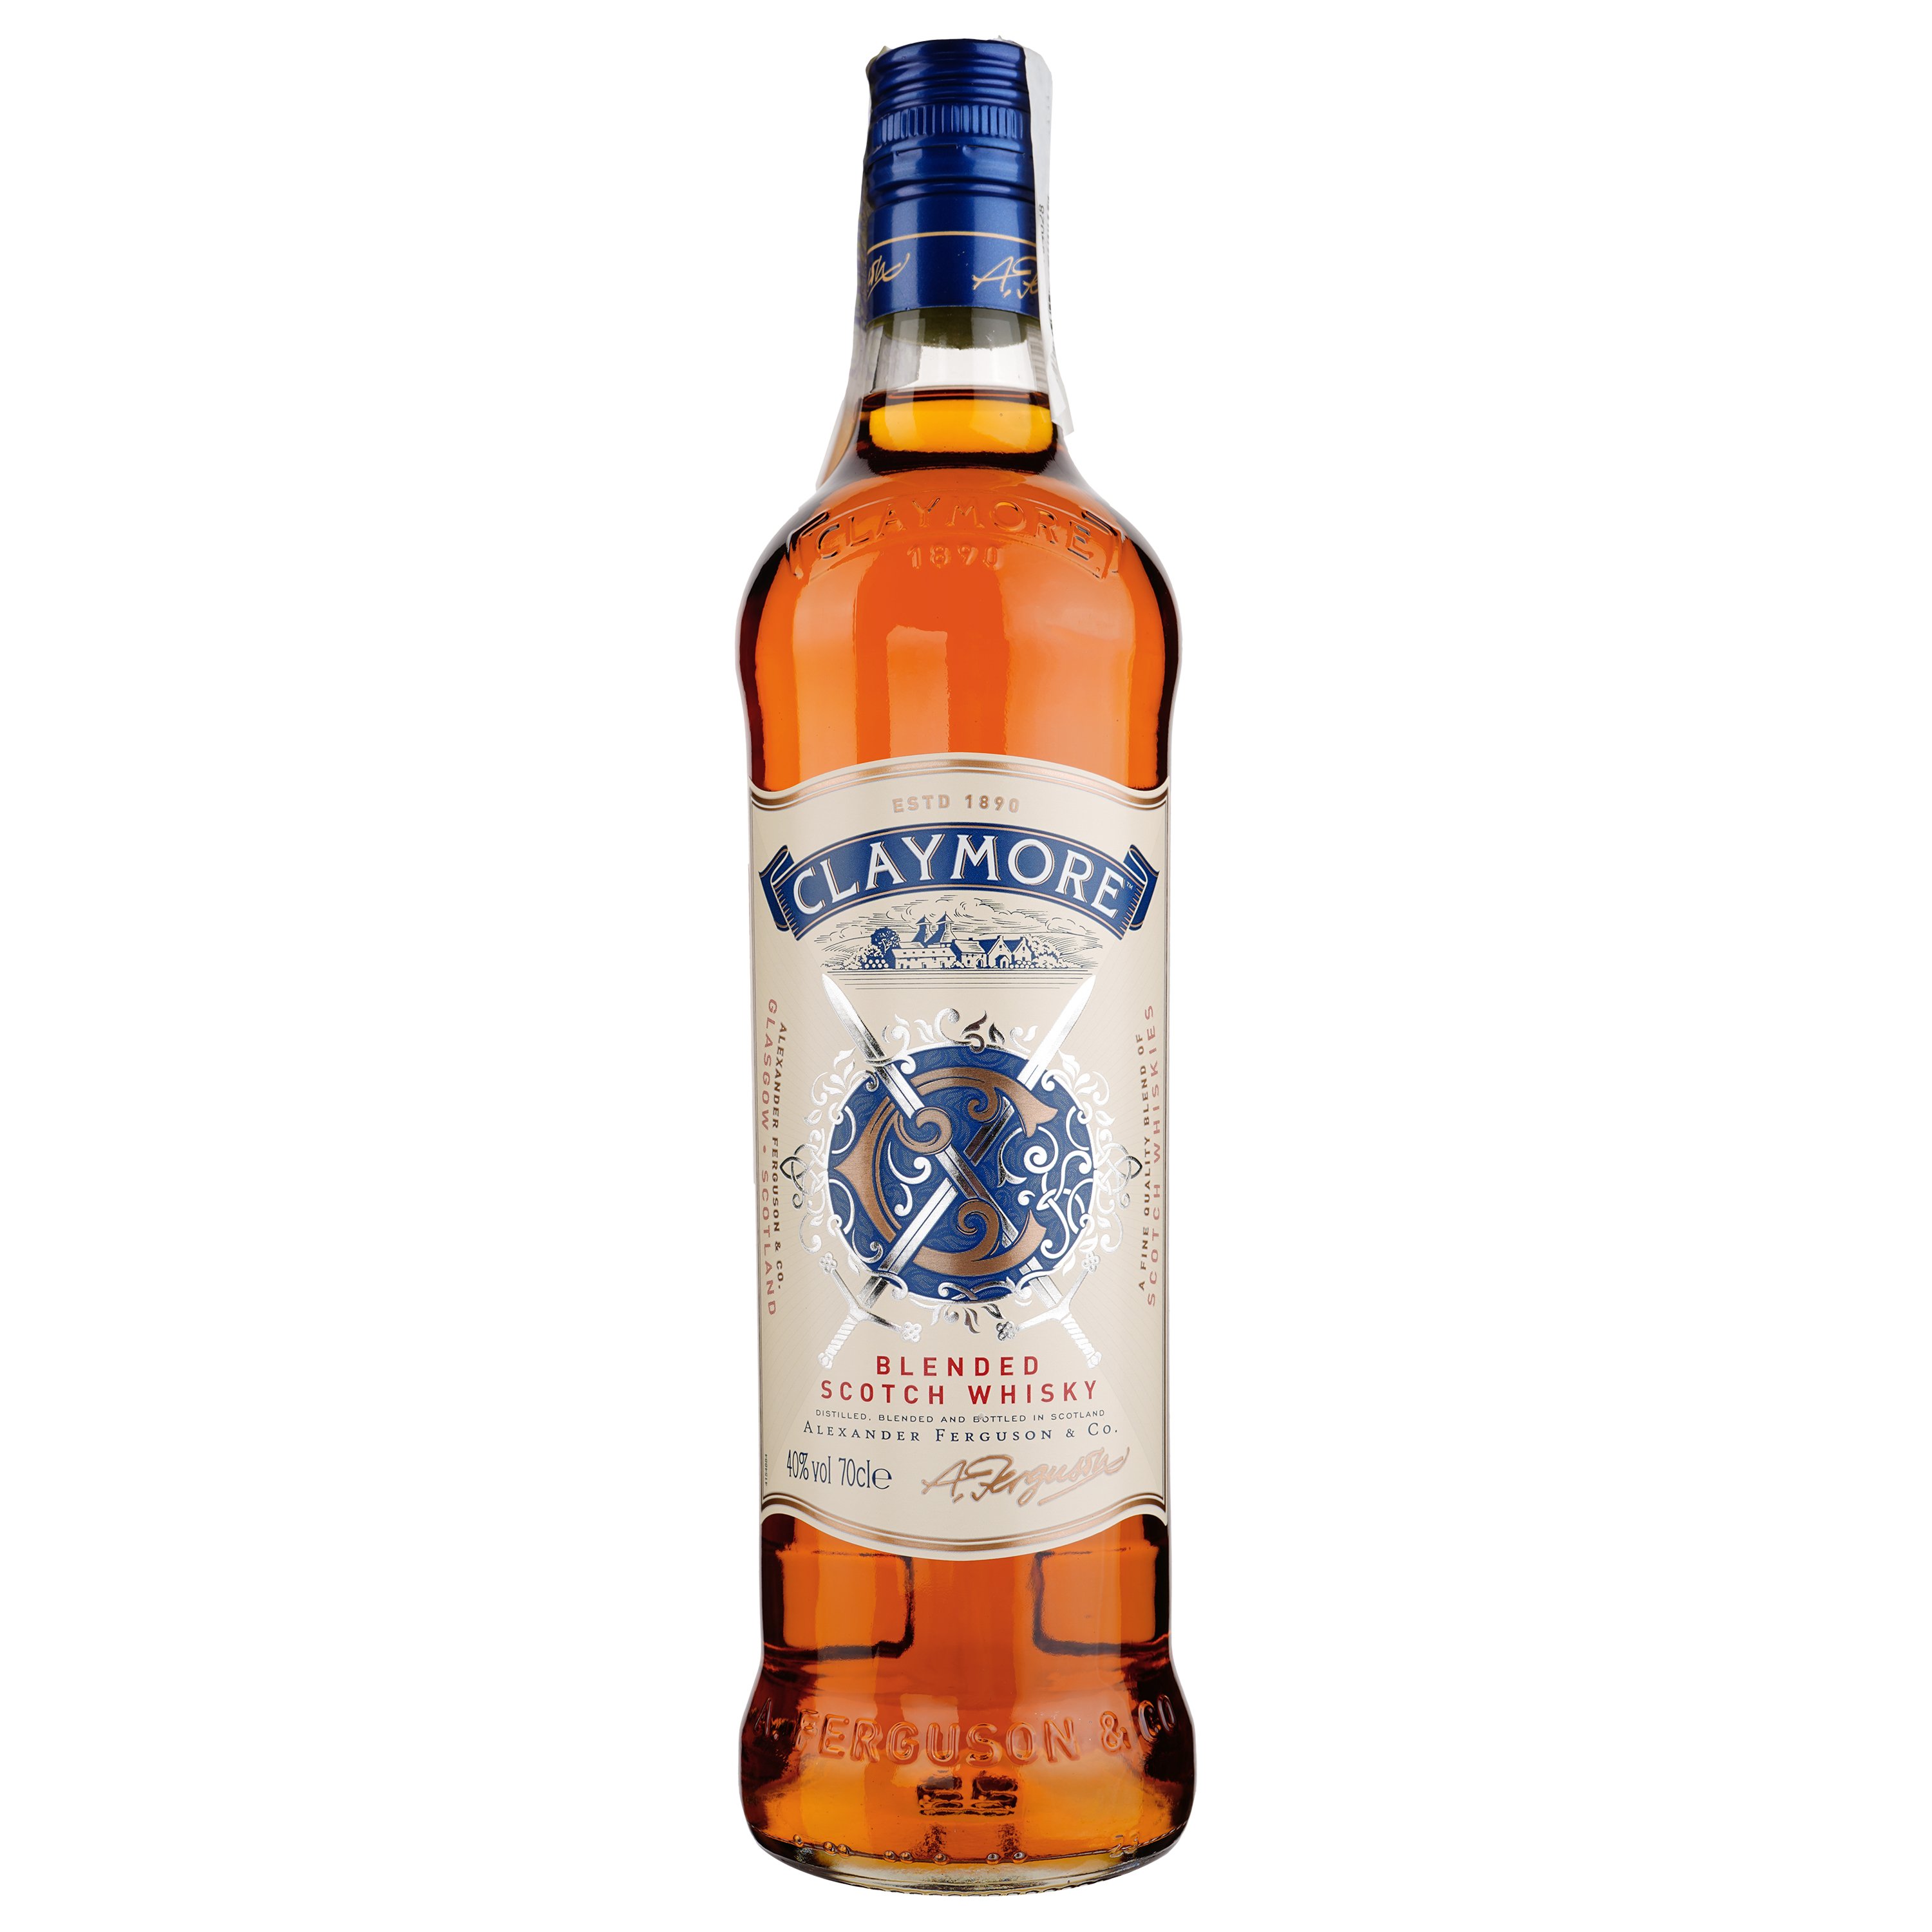 Виски Claymore Blended Scotch Whisky 40% 0.7 л - фото 1